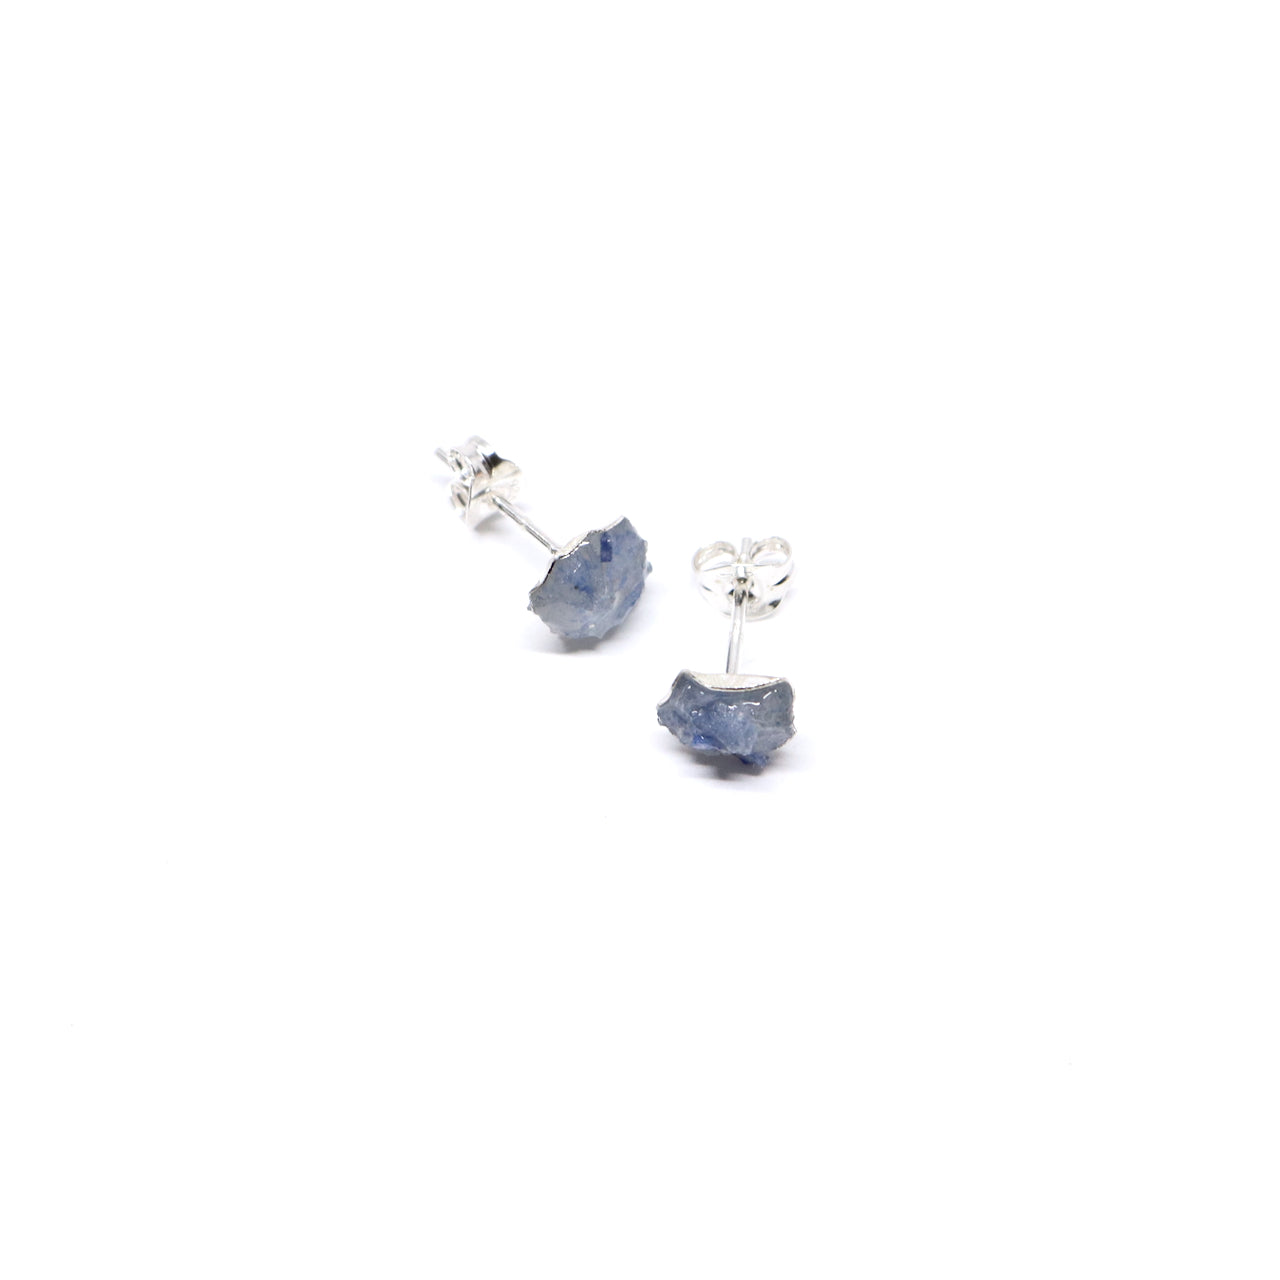 Gemstone and silver stud earrings. Made in Wanaka. Unique, colourful jewellery designed and crafted by New Zealand artist and jeweller Briar Hardy-Hesson.